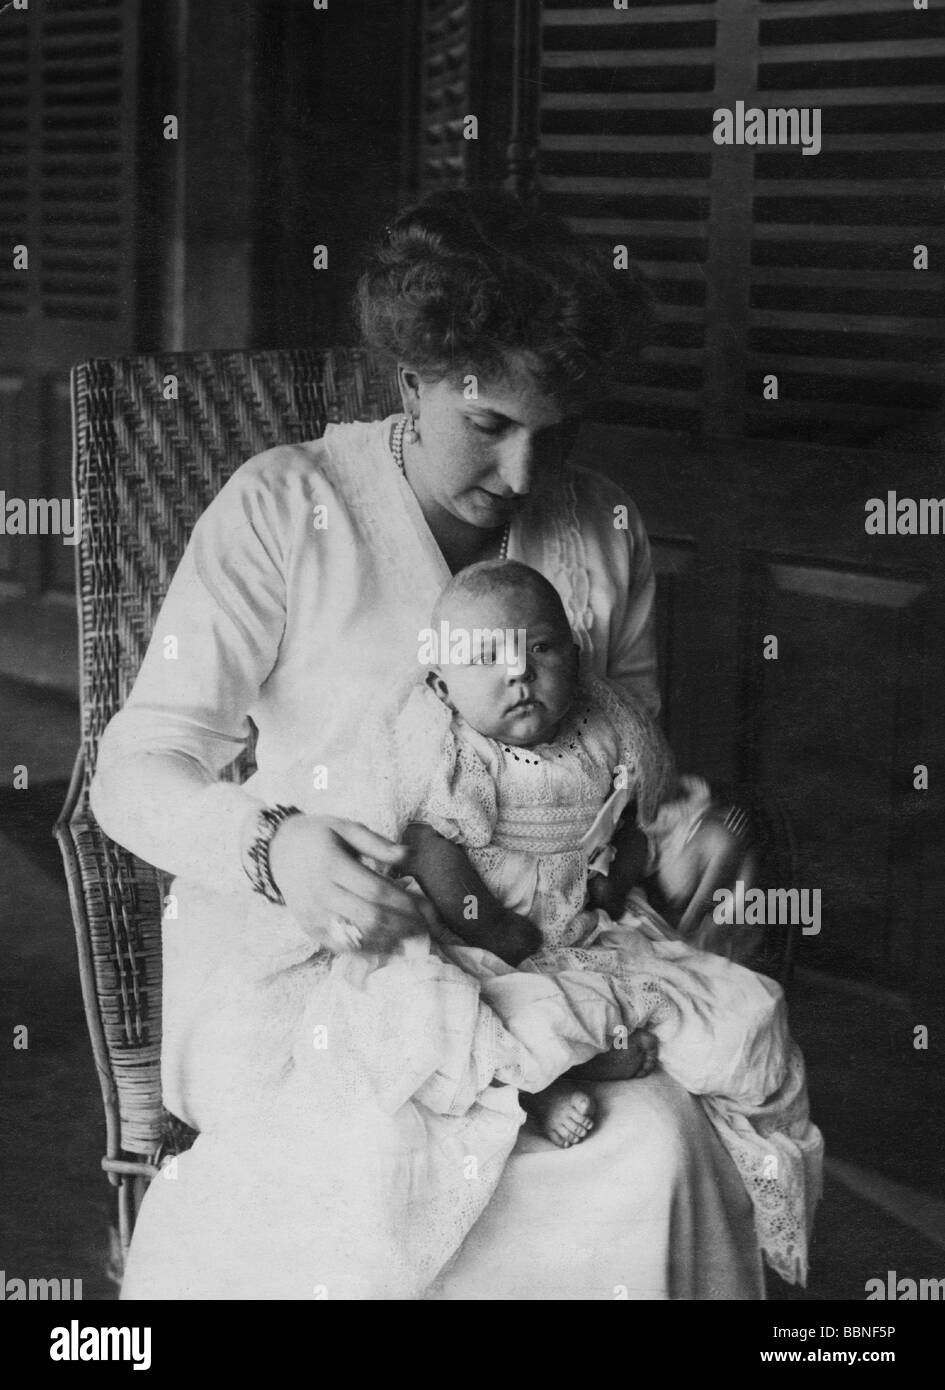 Victoria Eugenie of Battenberg, 24.10.1887 - 15.4.1969, Queen of Spain 1906 - 1931, with her son Juan, photo, circa 1914, Stock Photo